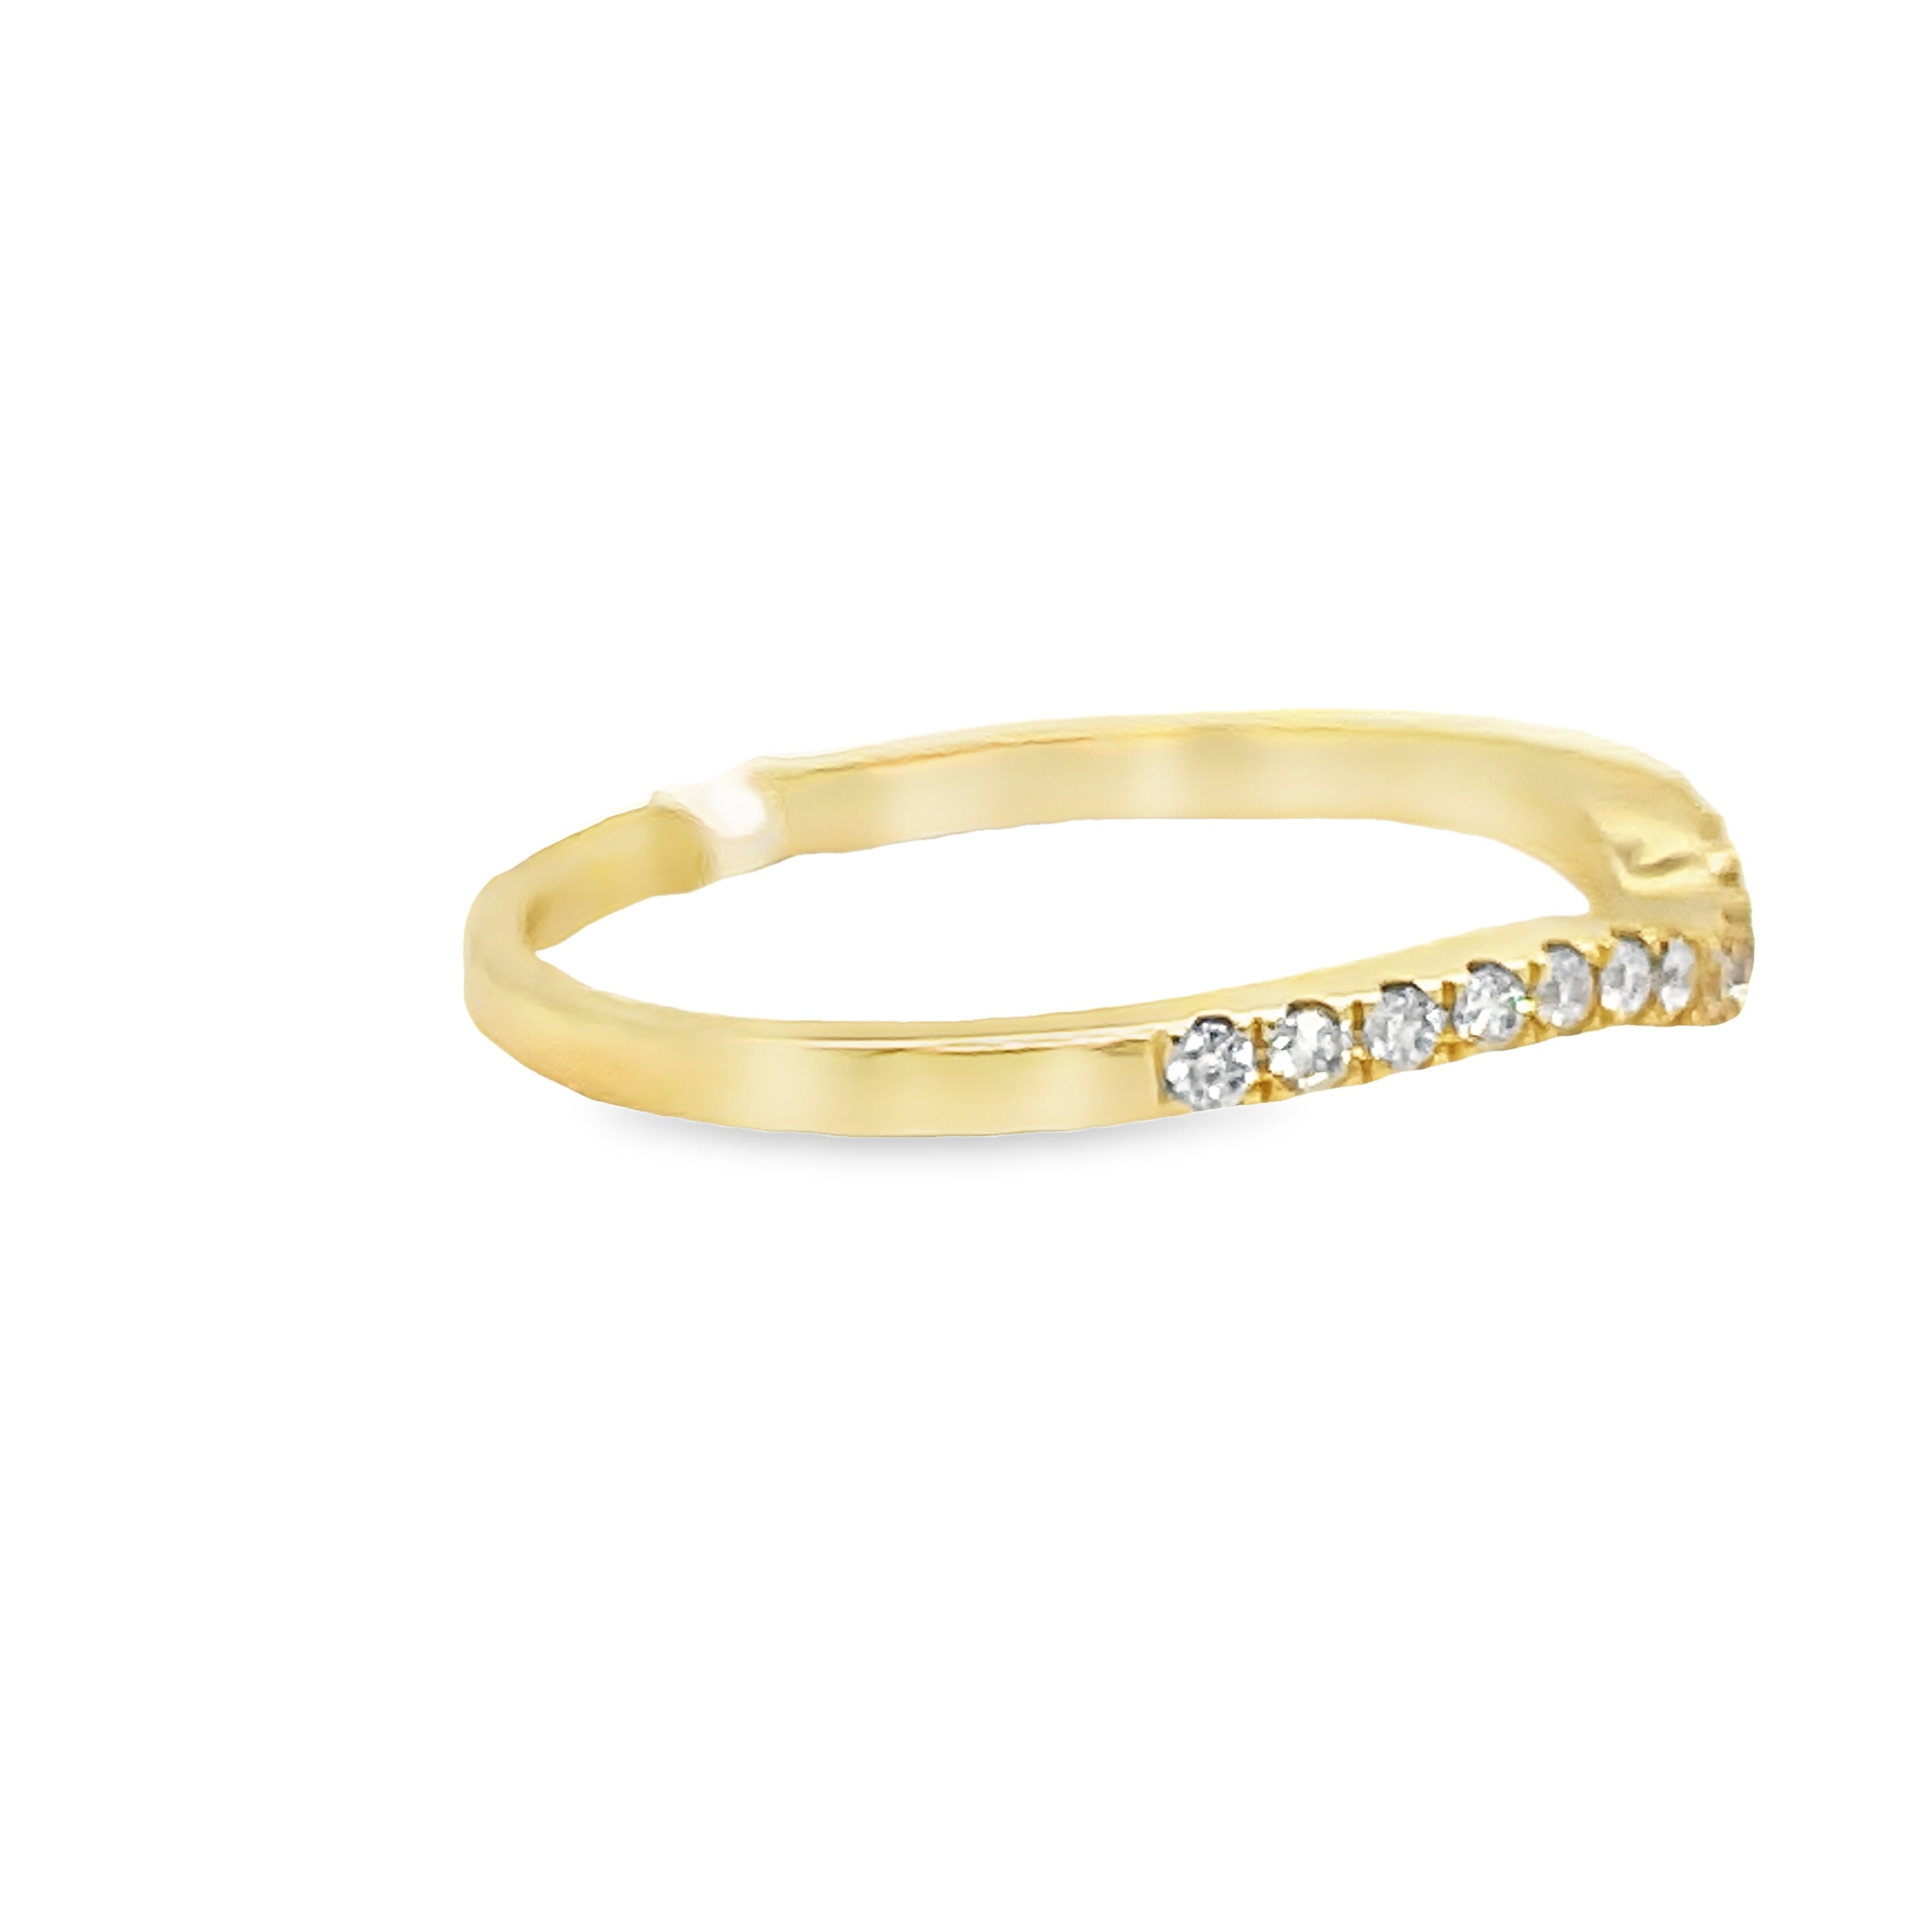 This stunning Diamond Wave Ring features 18k yellow gold and 0.16 cts of round diamonds, creating a unique curve style that is sure to catch the eye. Elevate any outfit with this elegant accessory that radiates luxury and sophistication. A must-have for any jewelry collection!